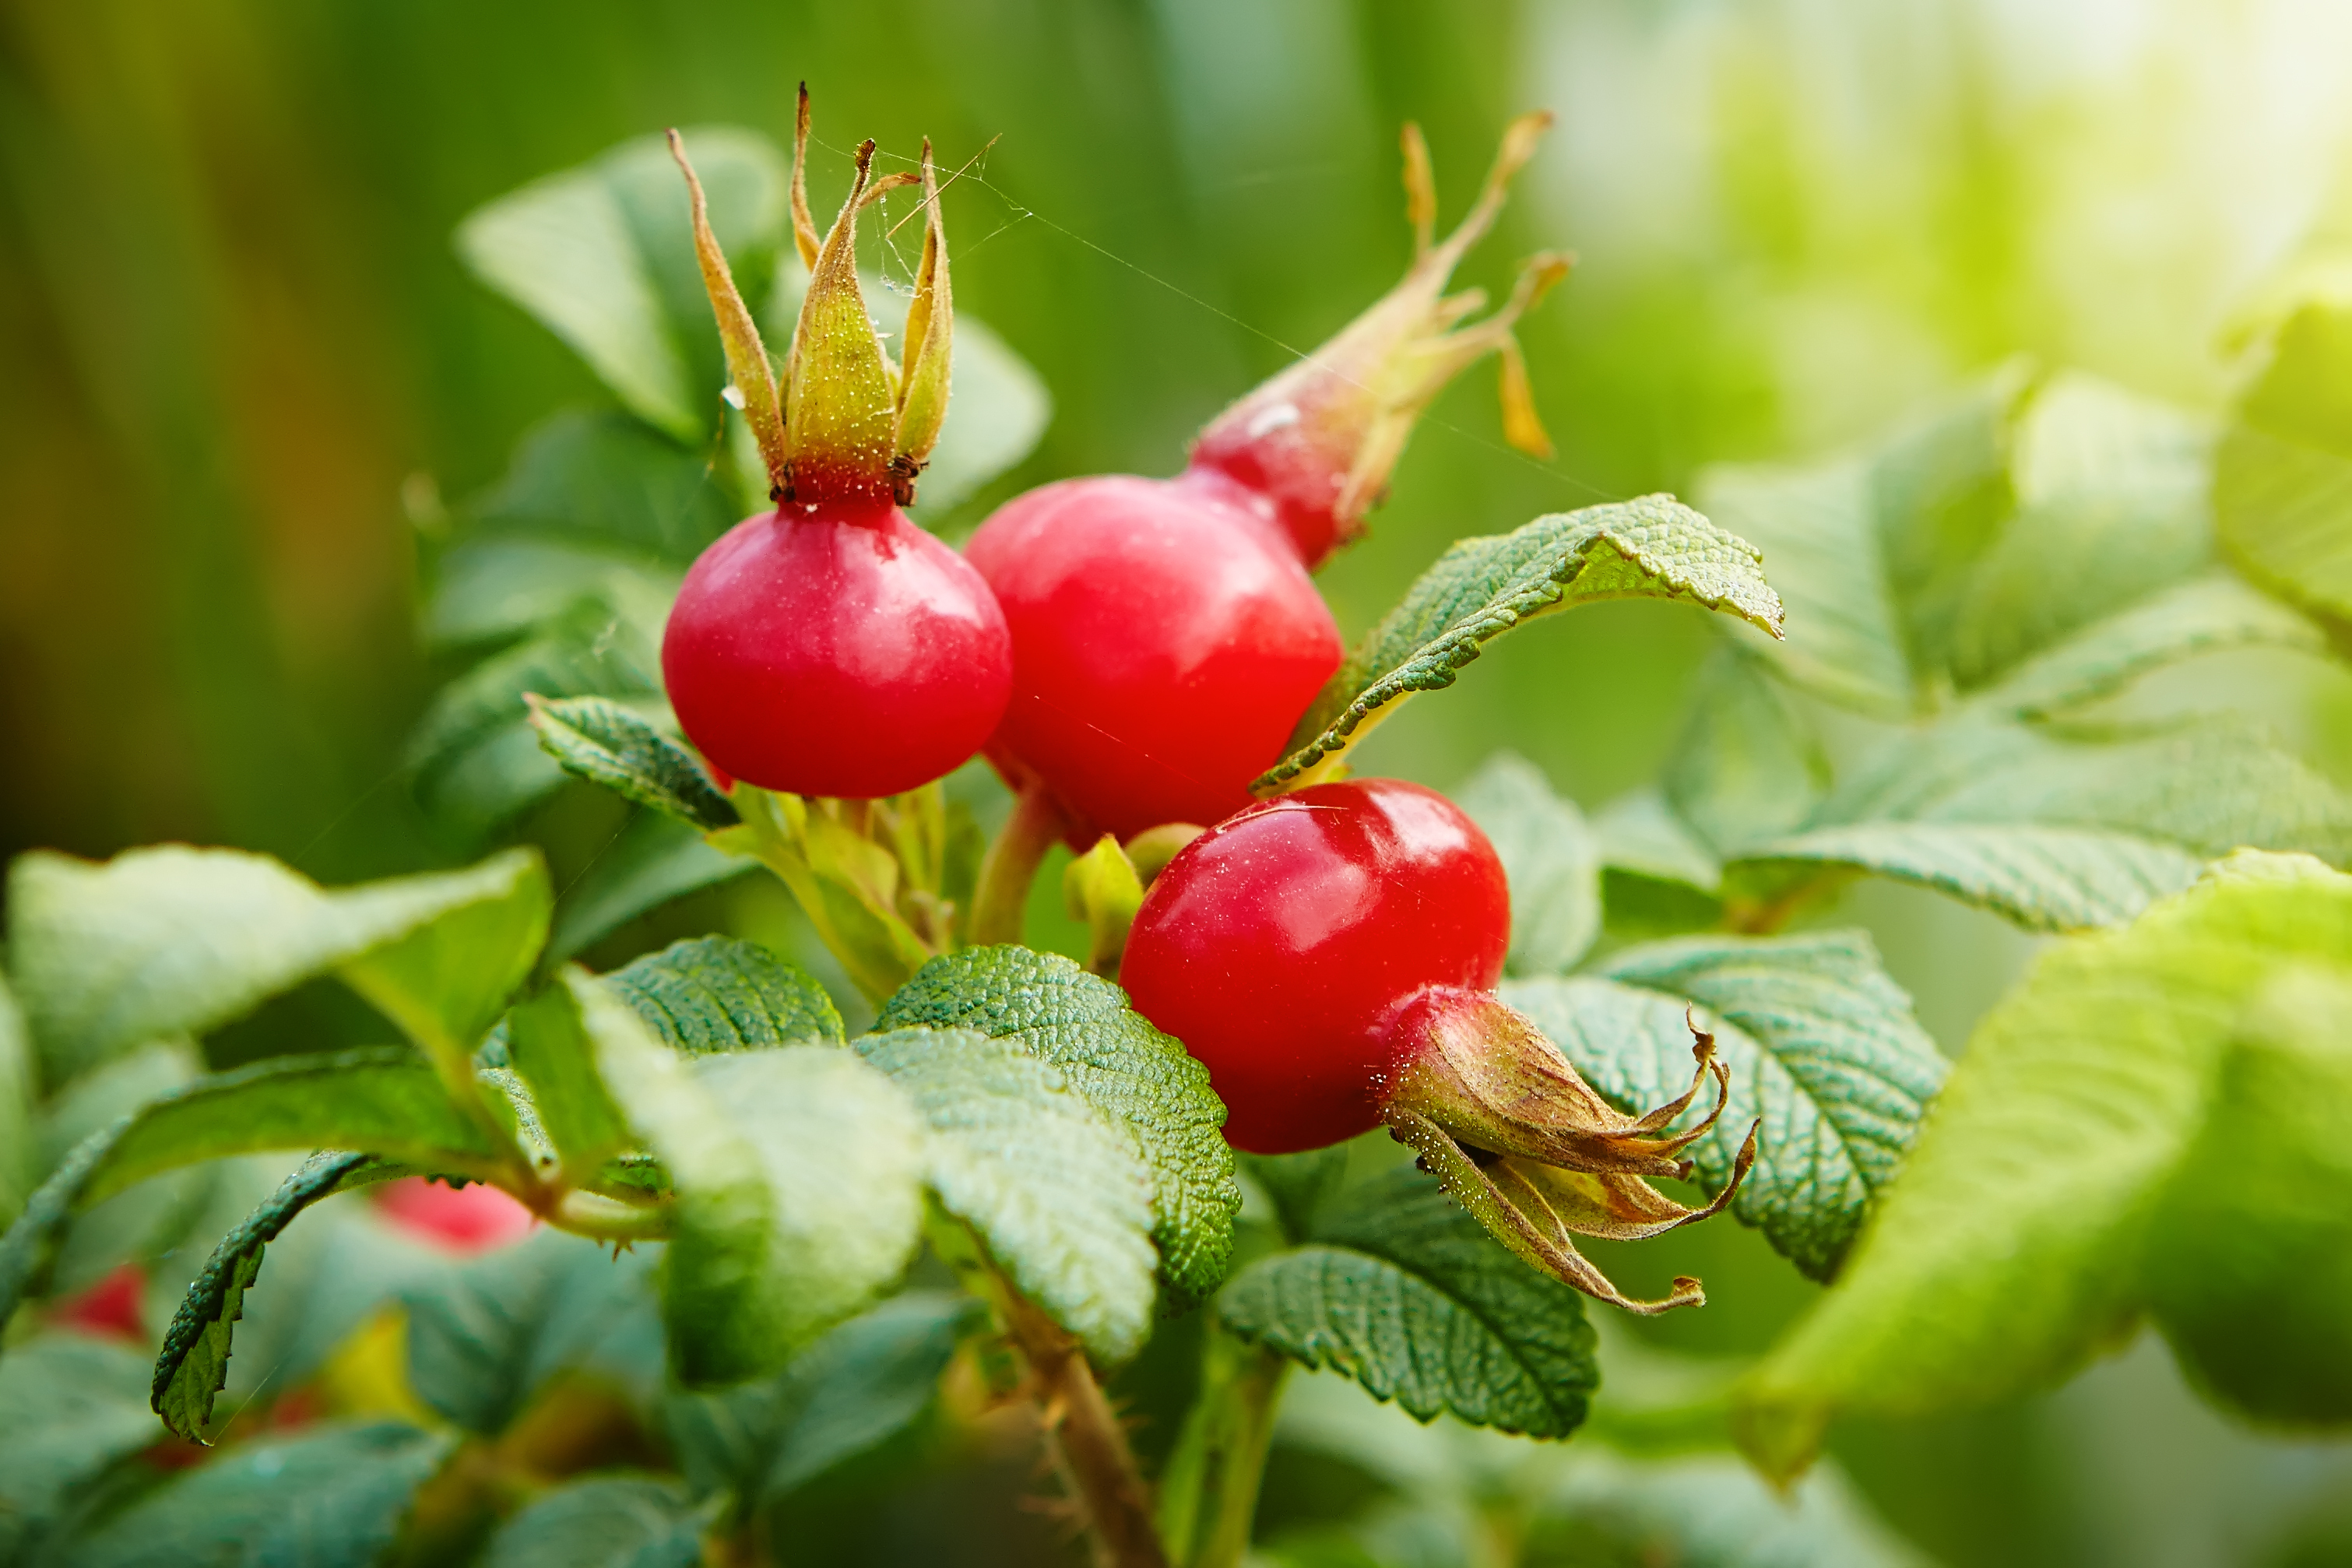 The new neuron is named after the small, red fruits of a rose plant, called rosehips.